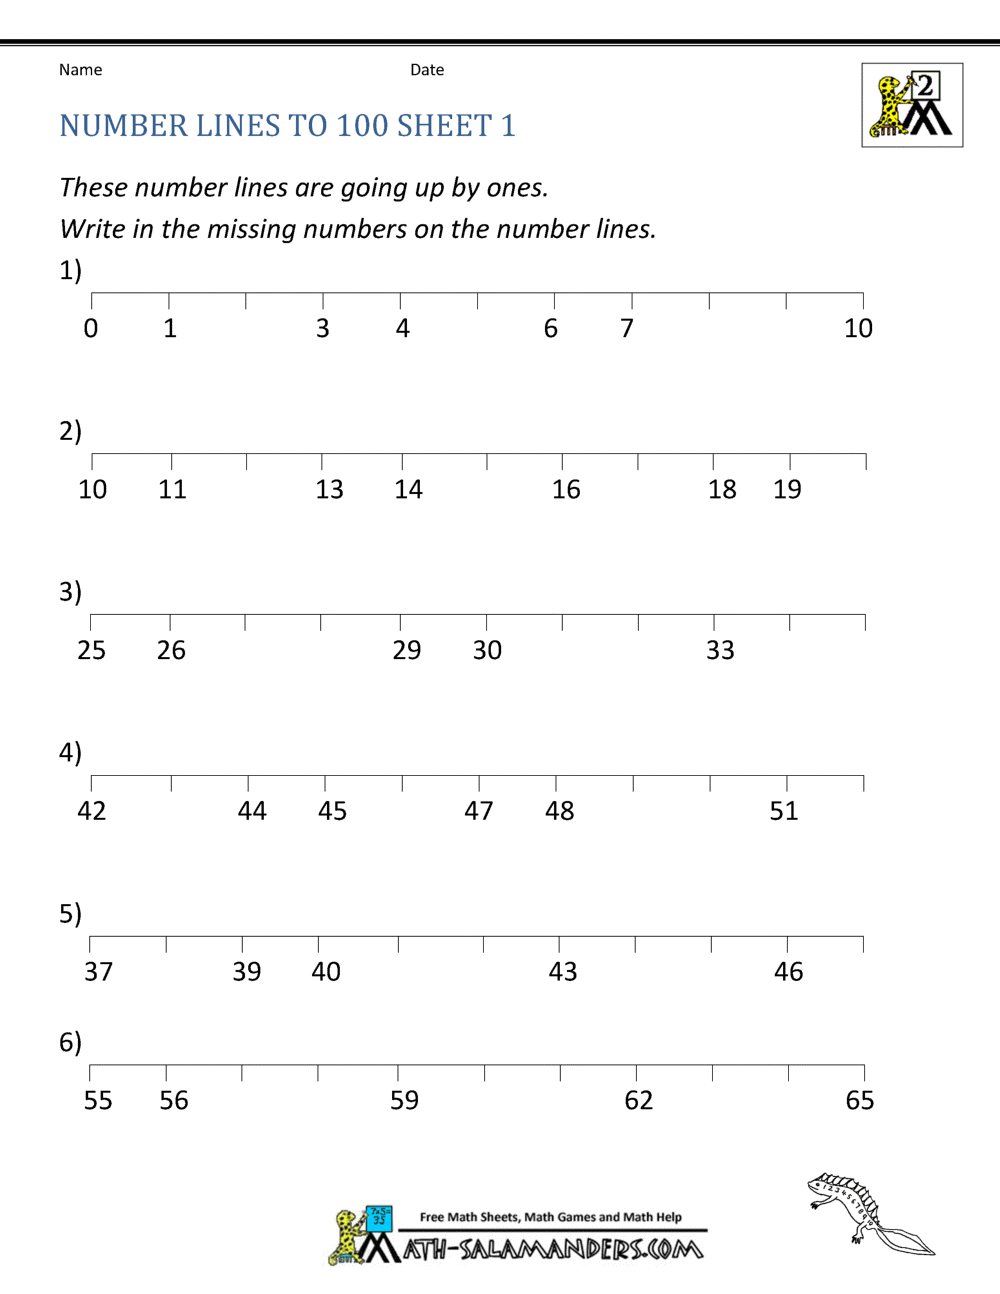 number-lines-worksheets-counting-by-1s-and-halves